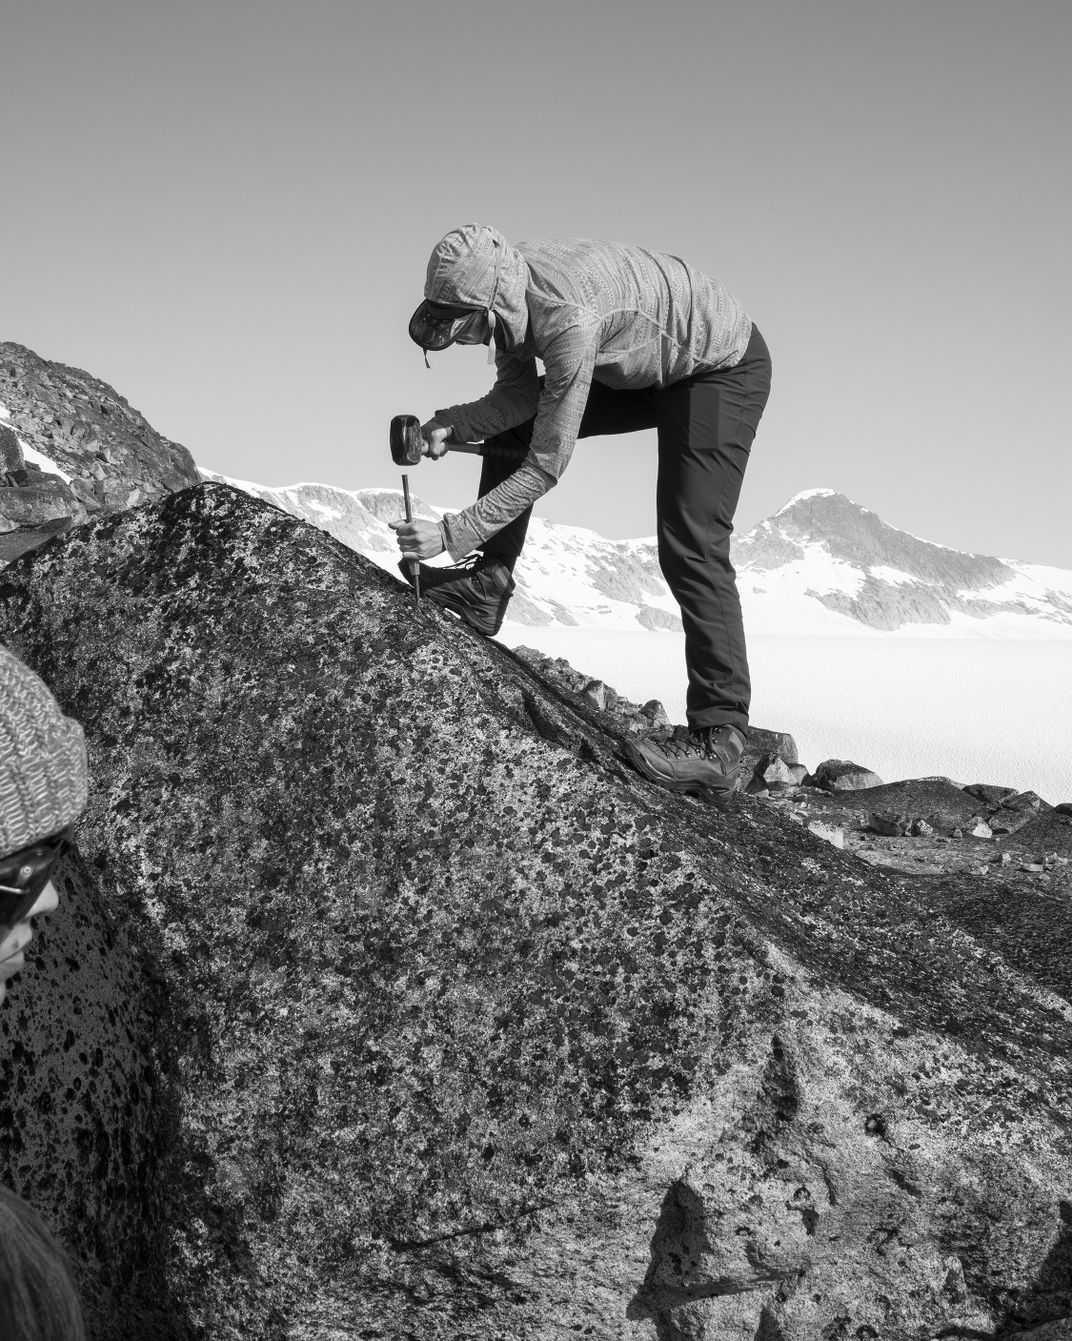 At a site called Taku D, above the Taku Glacier, Dibble uses a rubber mallet and a chisel to chip away flakes from the boulder to send to a lab for sampling.